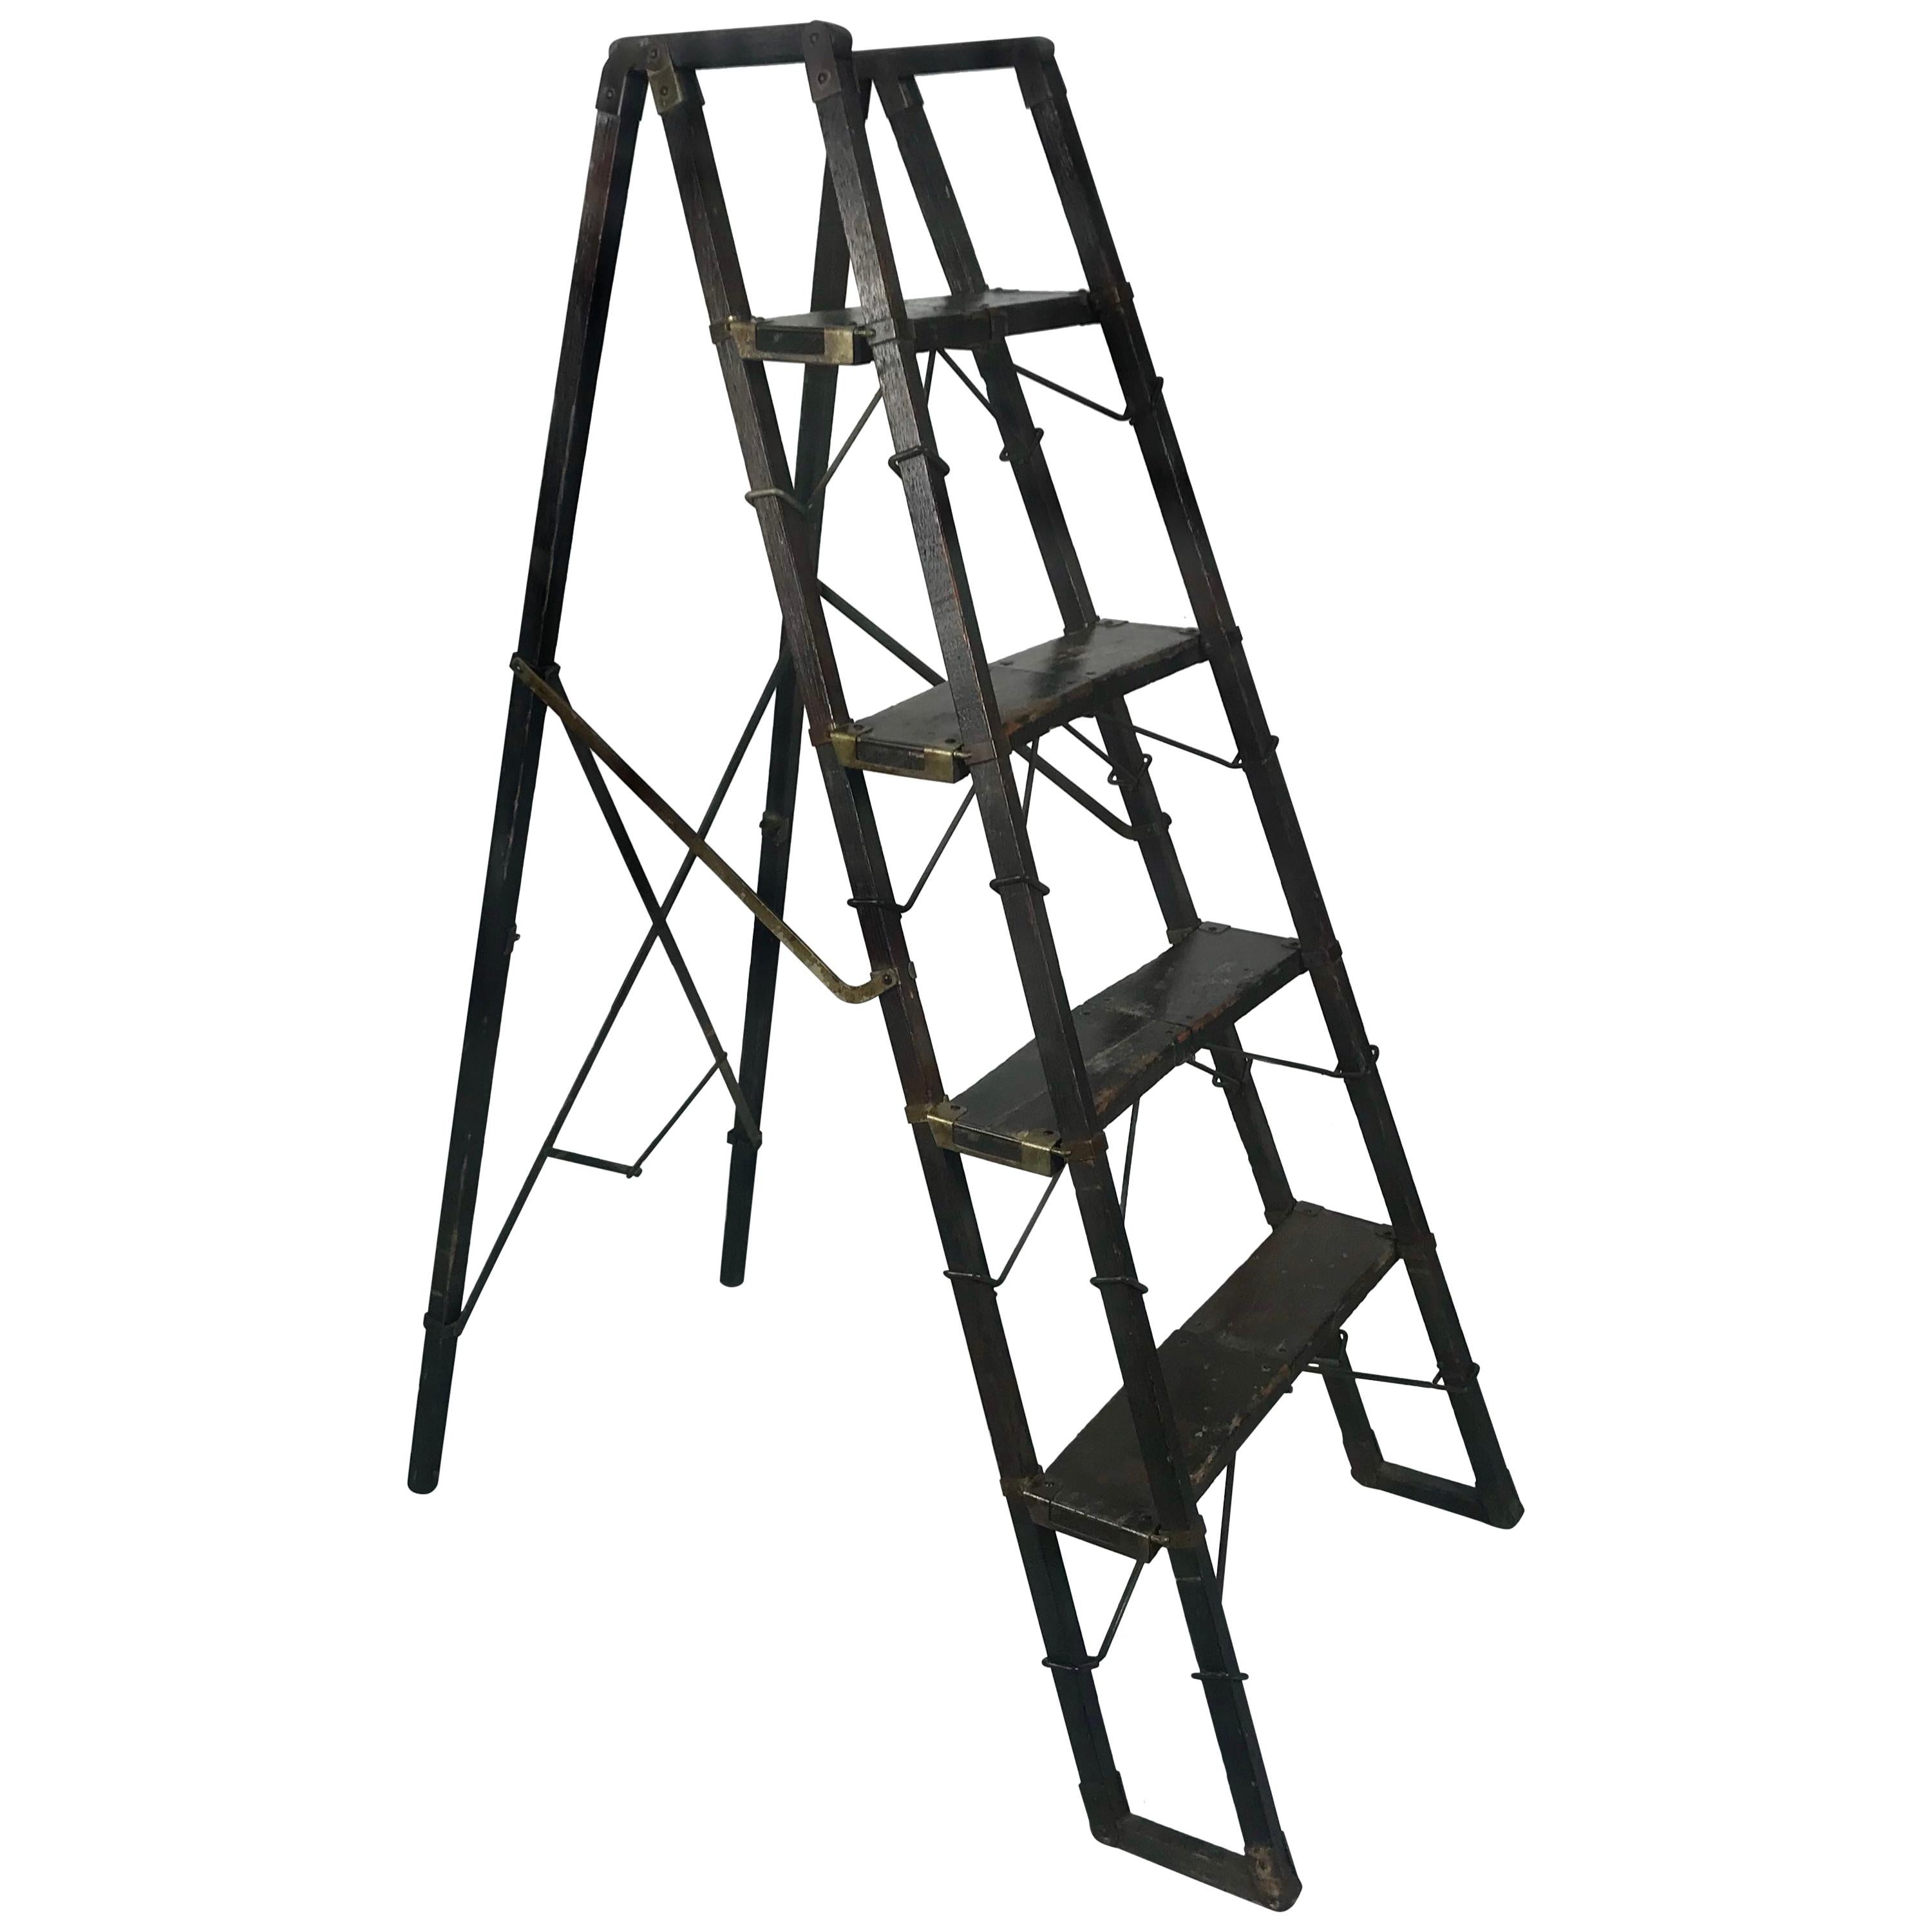 Turn of Century Industrial Collapsable Step Ladder Closes